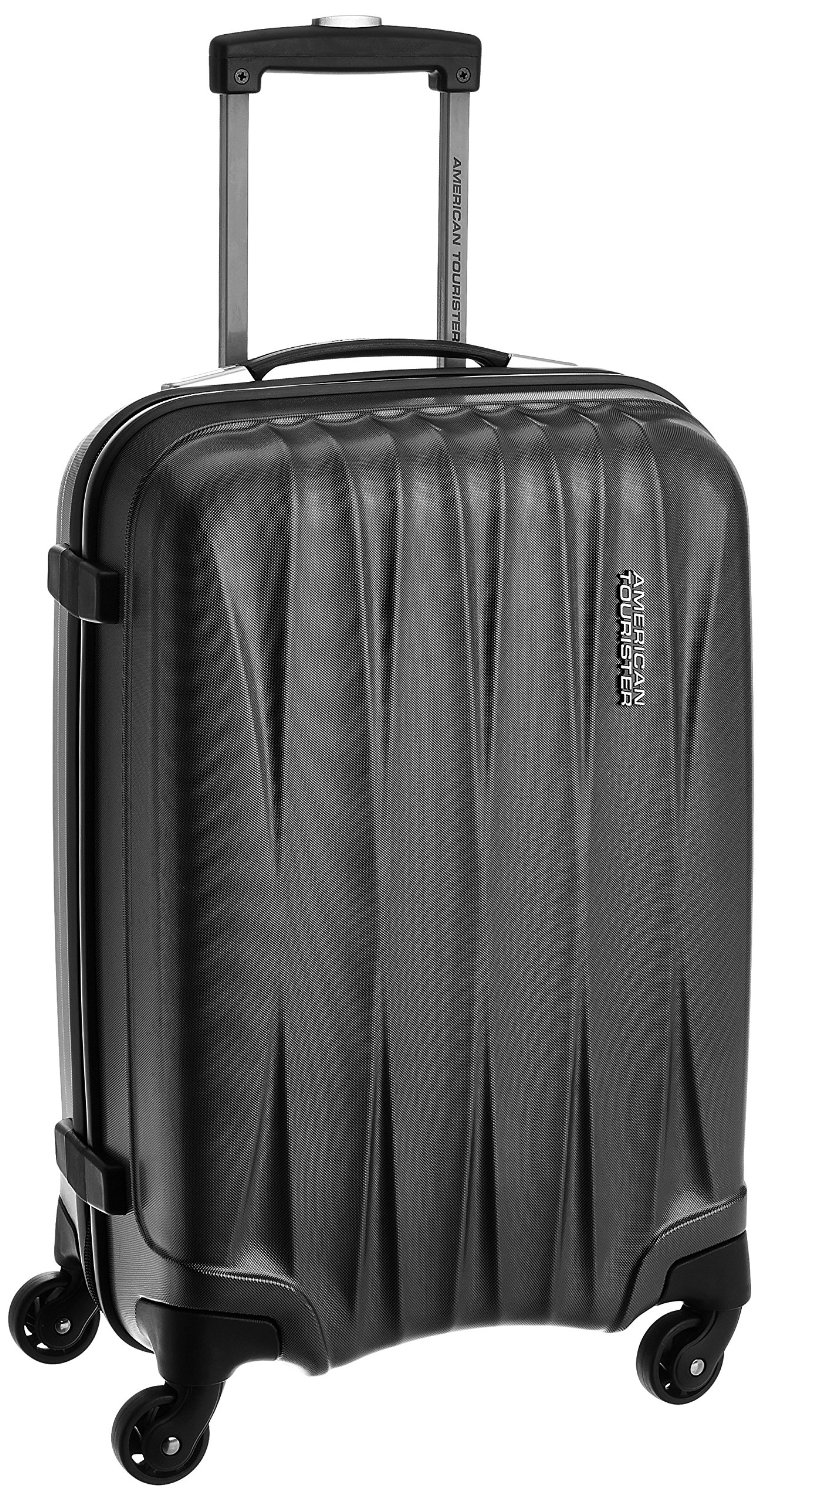 Amazon - Flat 60% off on American Tourister Luggage bags